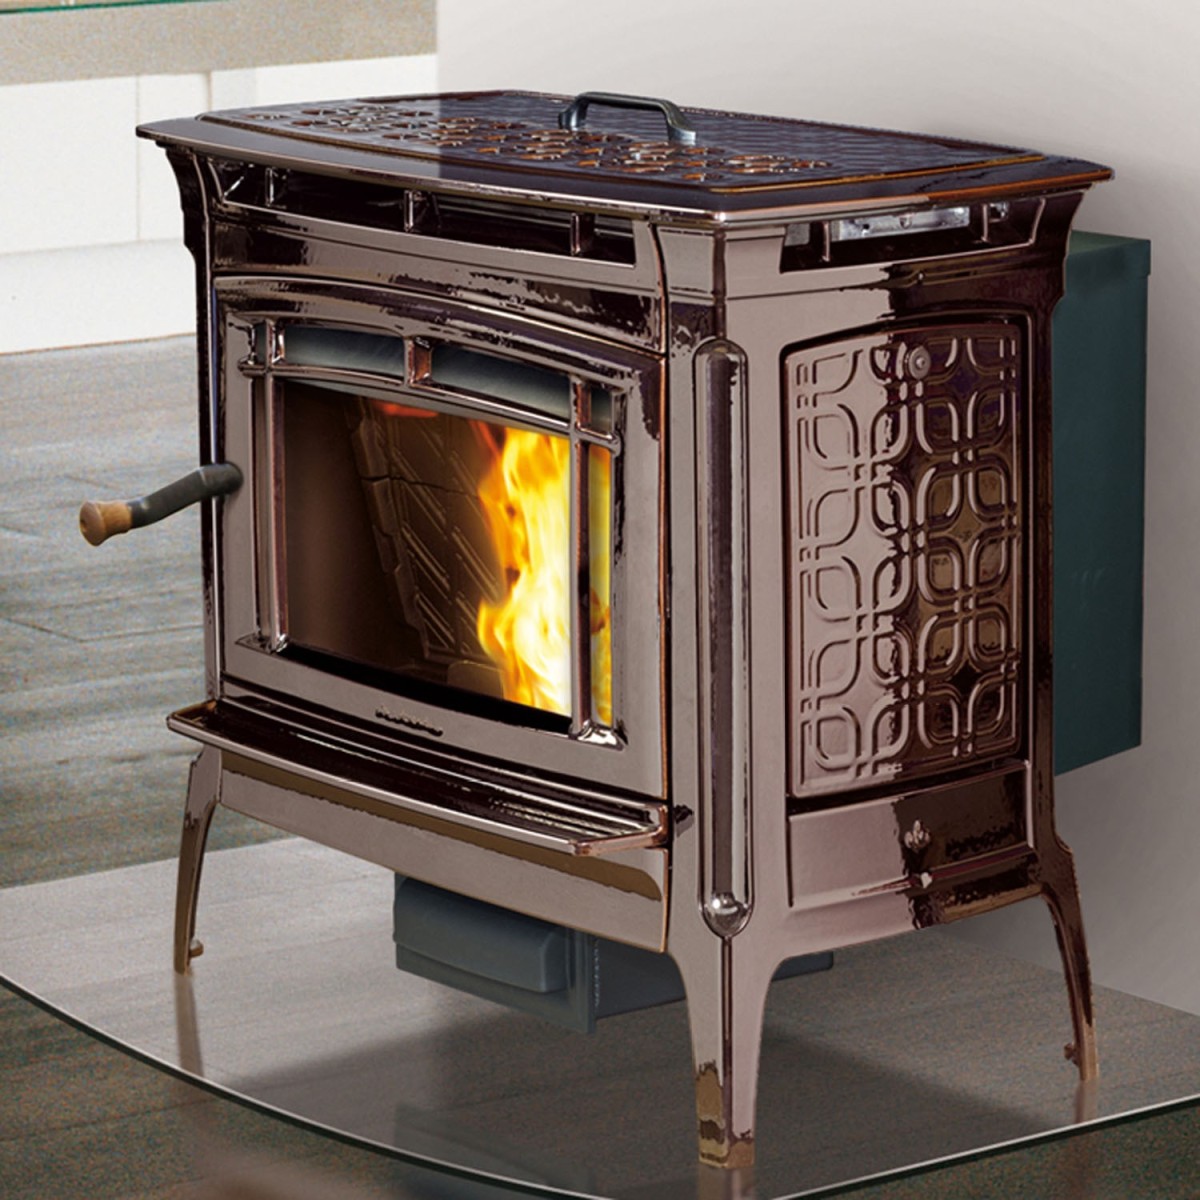 stay-warm-and-save-money-with-eco-friendly-wood-pellet-stoves-rex